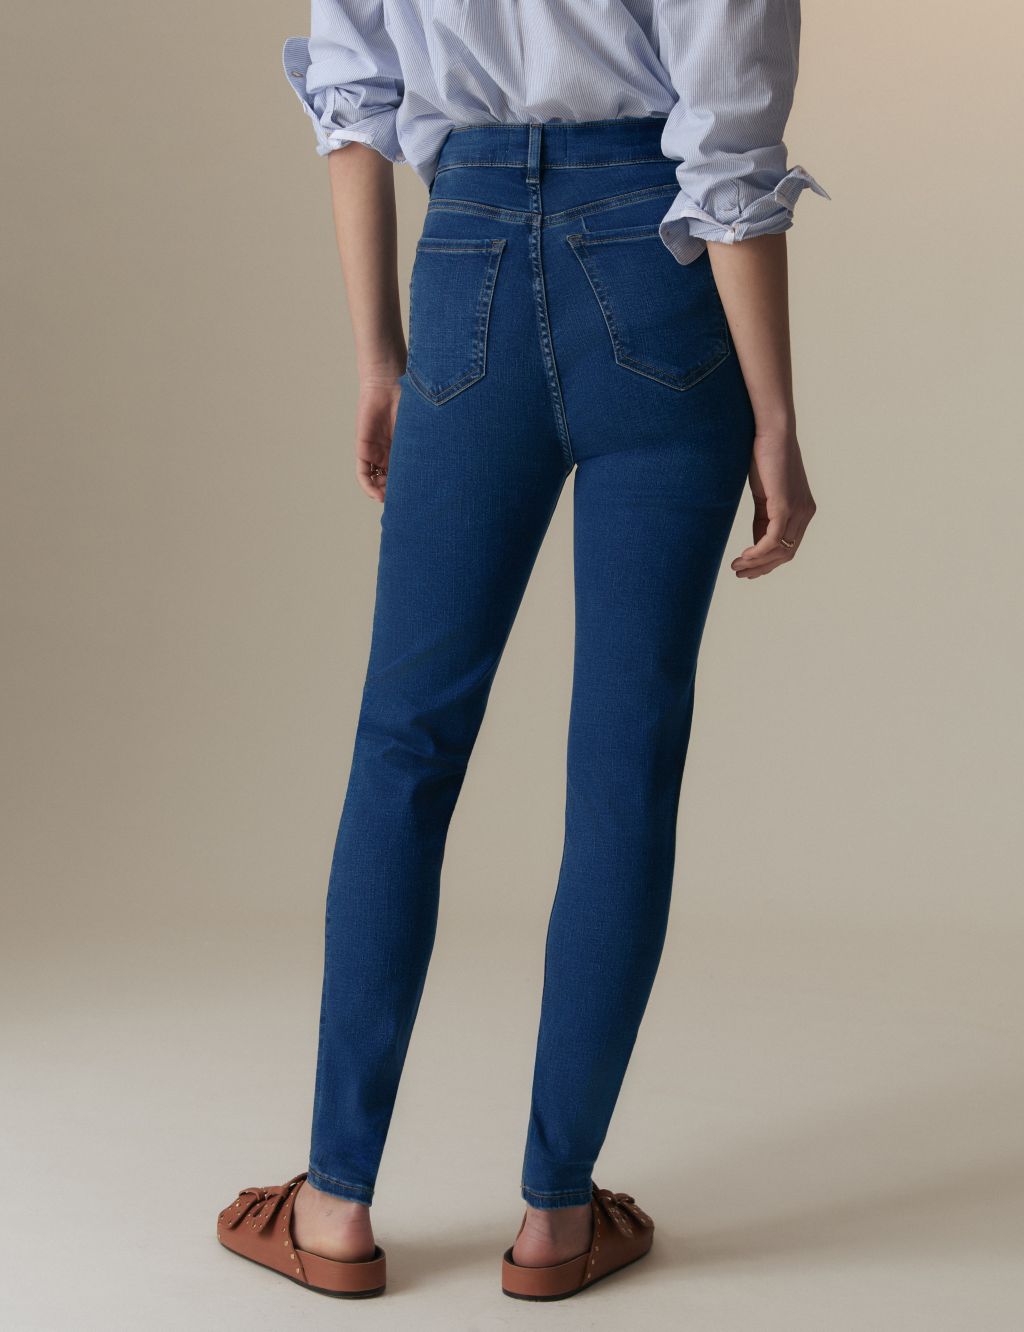 Lyocell Rich High Waisted Skinny Jeans image 5